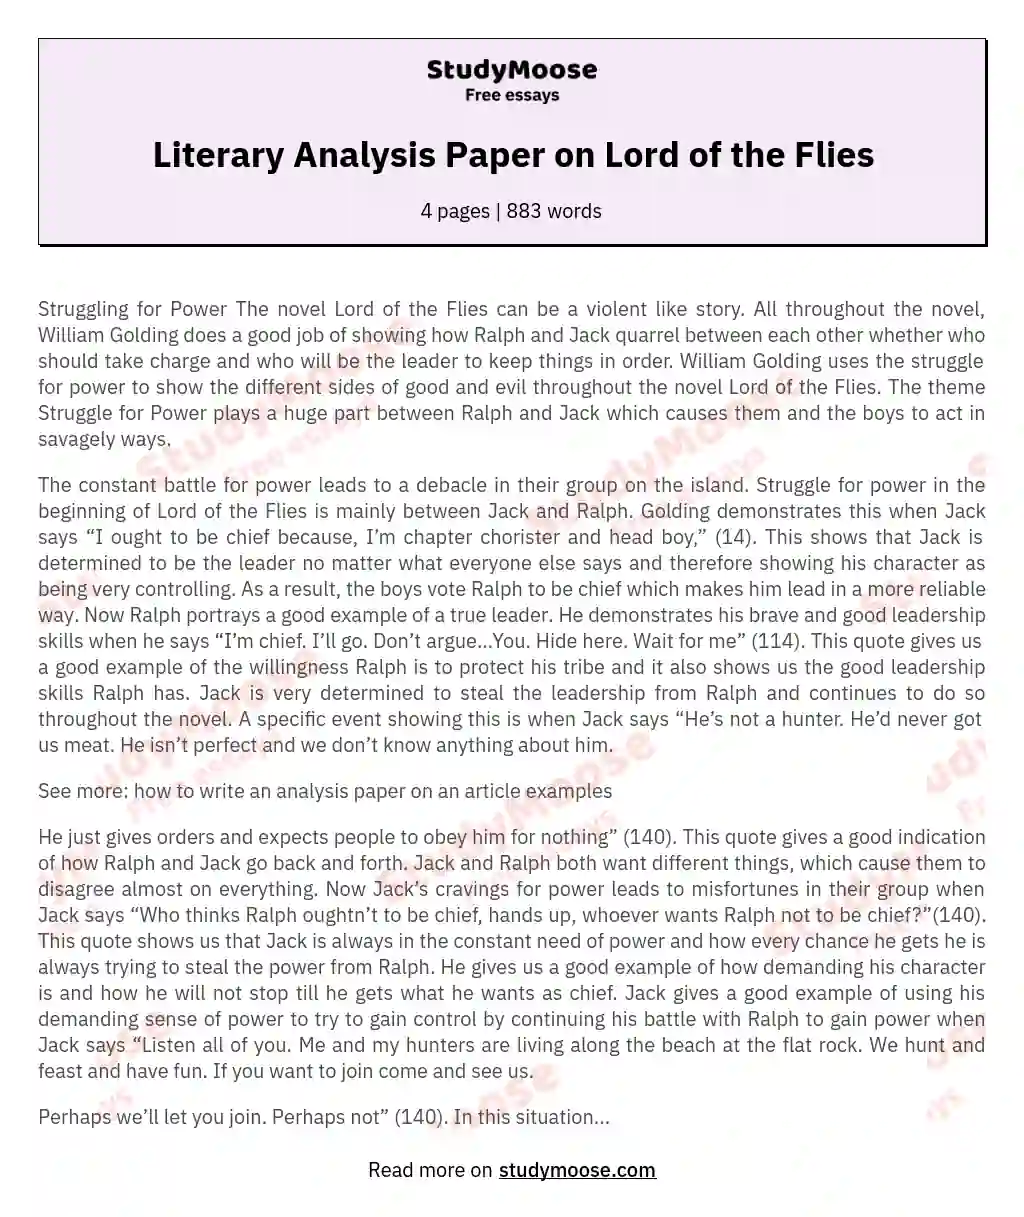 lord of the flies theme analysis